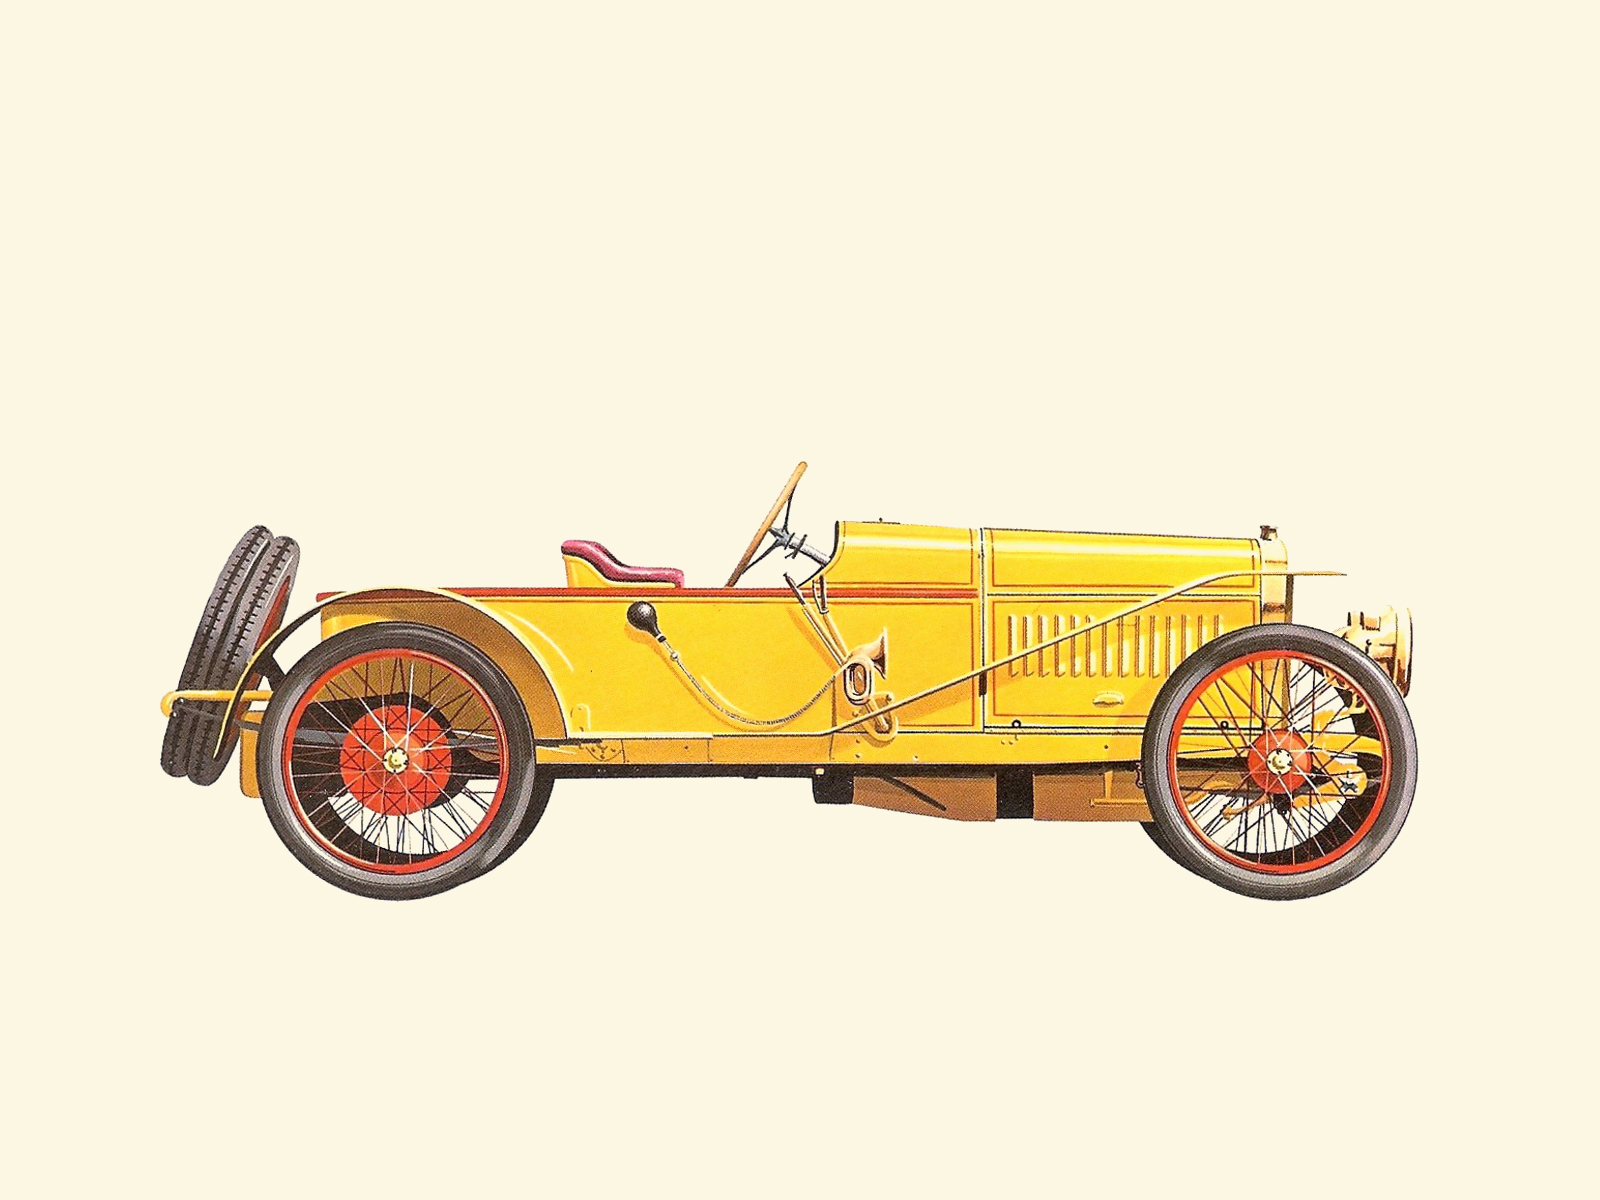 1912 Hispano-Suiza Alfonso - Illustrated by Pierre Dumont